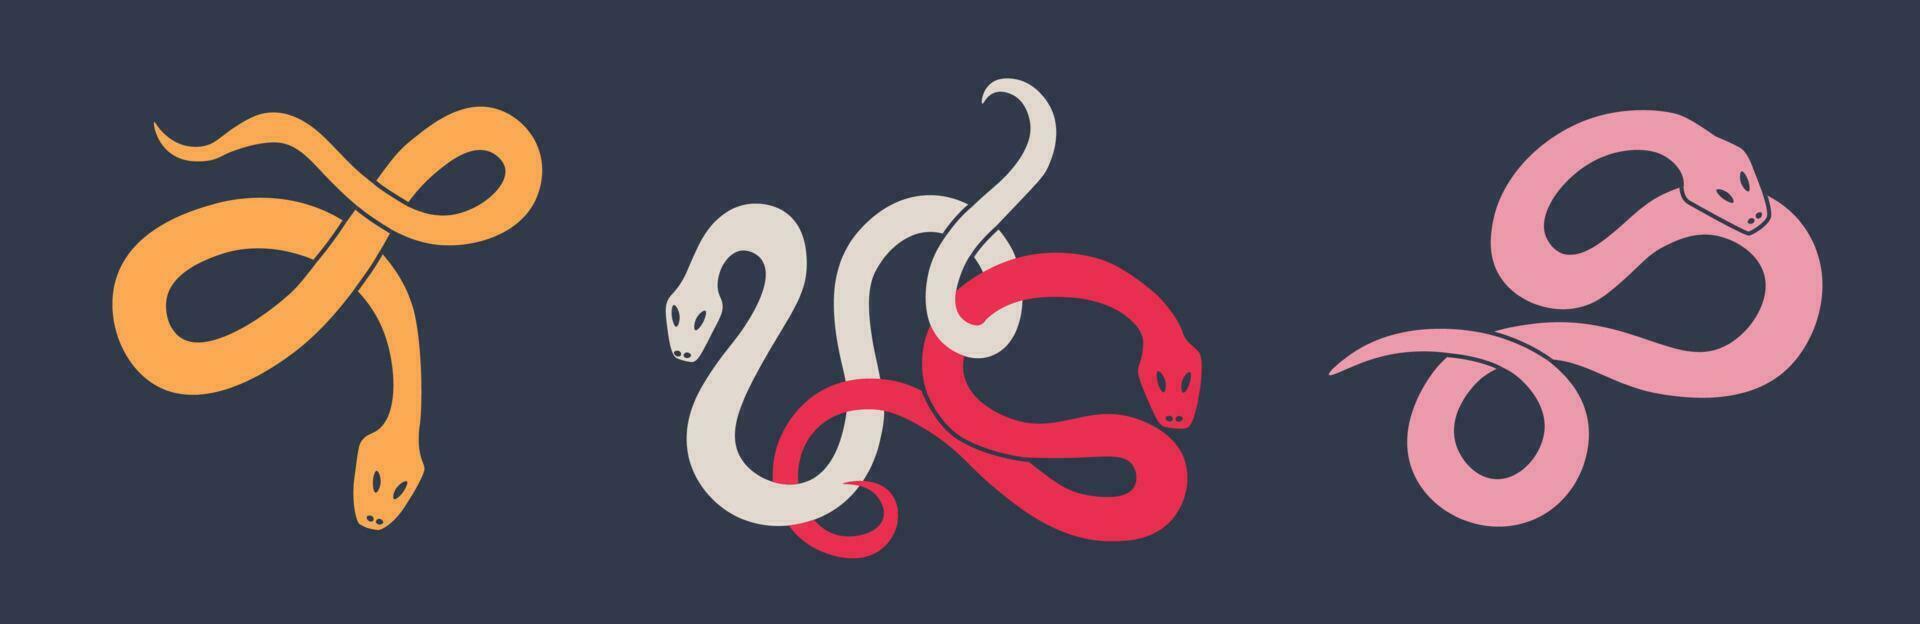 Twisted snake silhouettes. Flat vector illustration for design.